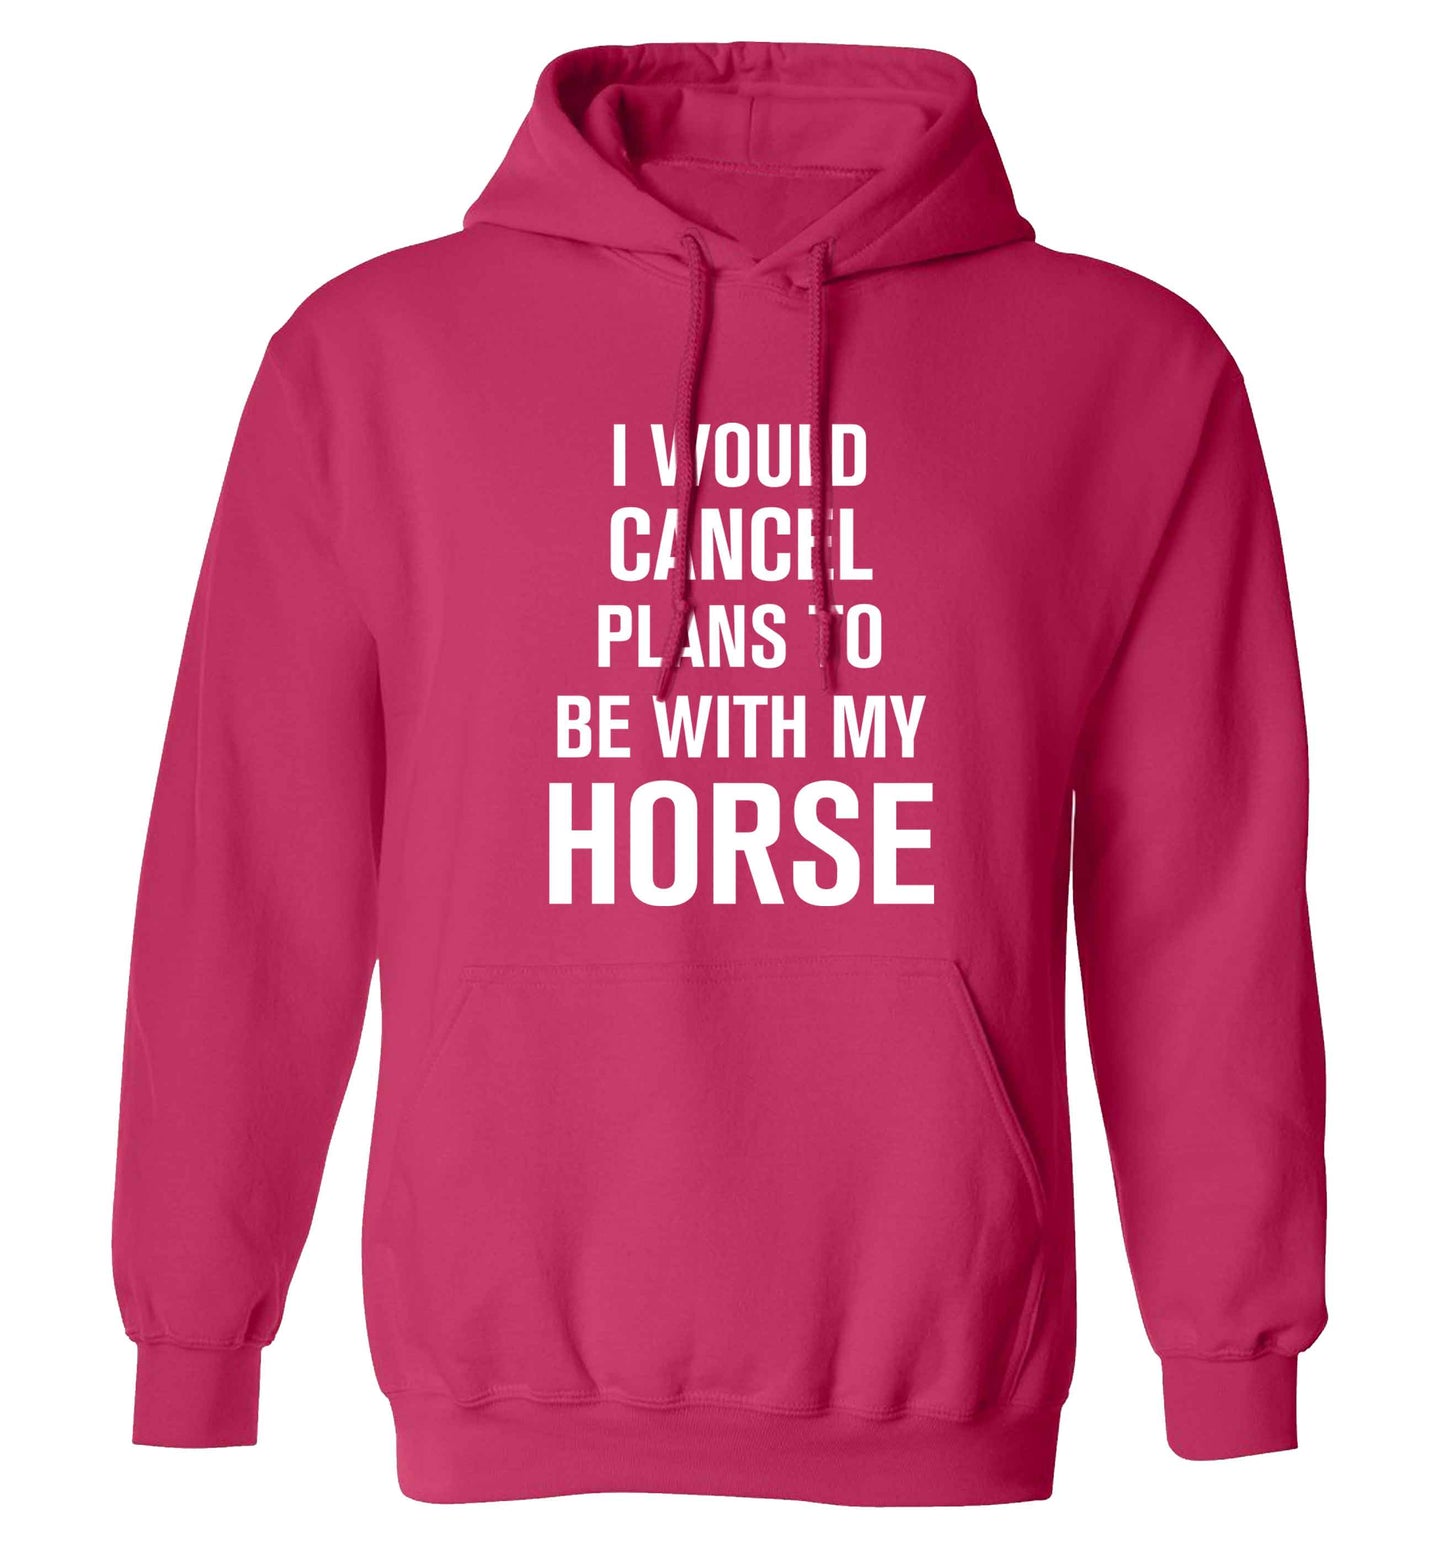 I will cancel plans to be with my horse adults unisex pink hoodie 2XL